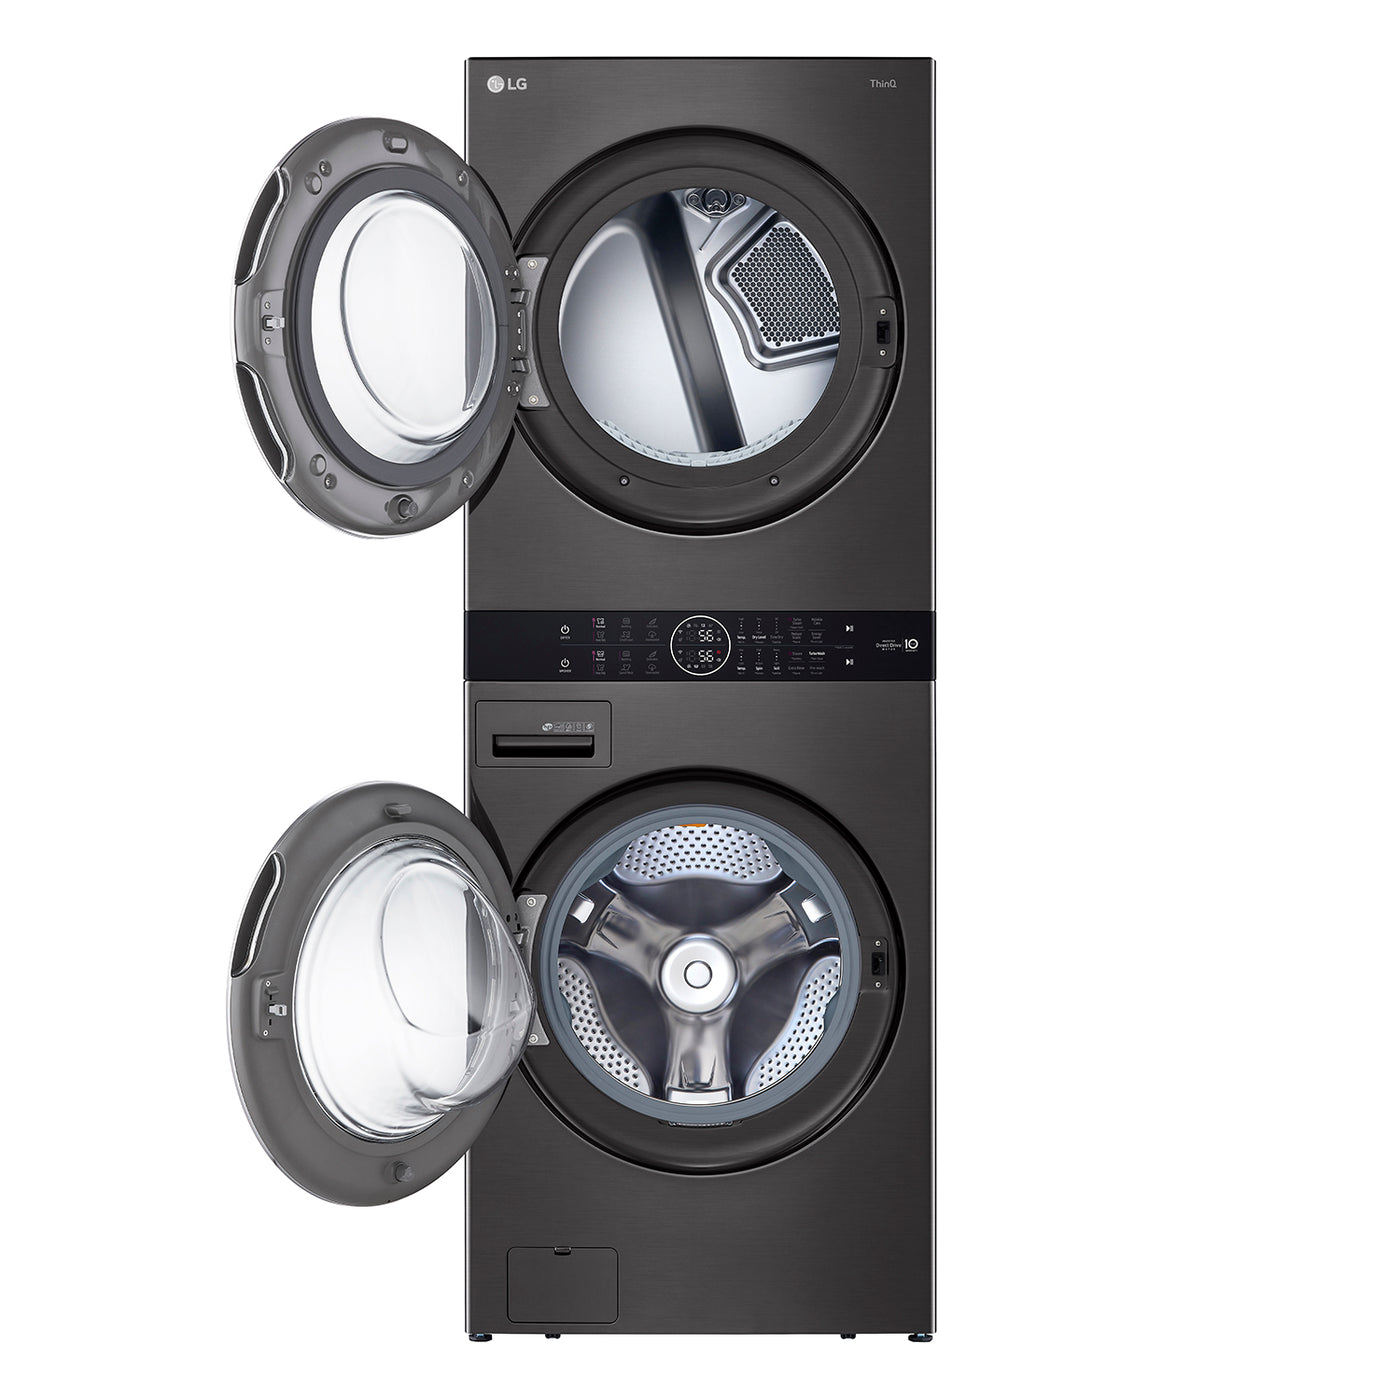 LG Black Steel Front Load LG WashTower™ with Centre Control™ 5.2 Cu. Ft. Steam Washer and 7.4 Cu. Ft. Electric Steam Dryer - WKEX200HBA